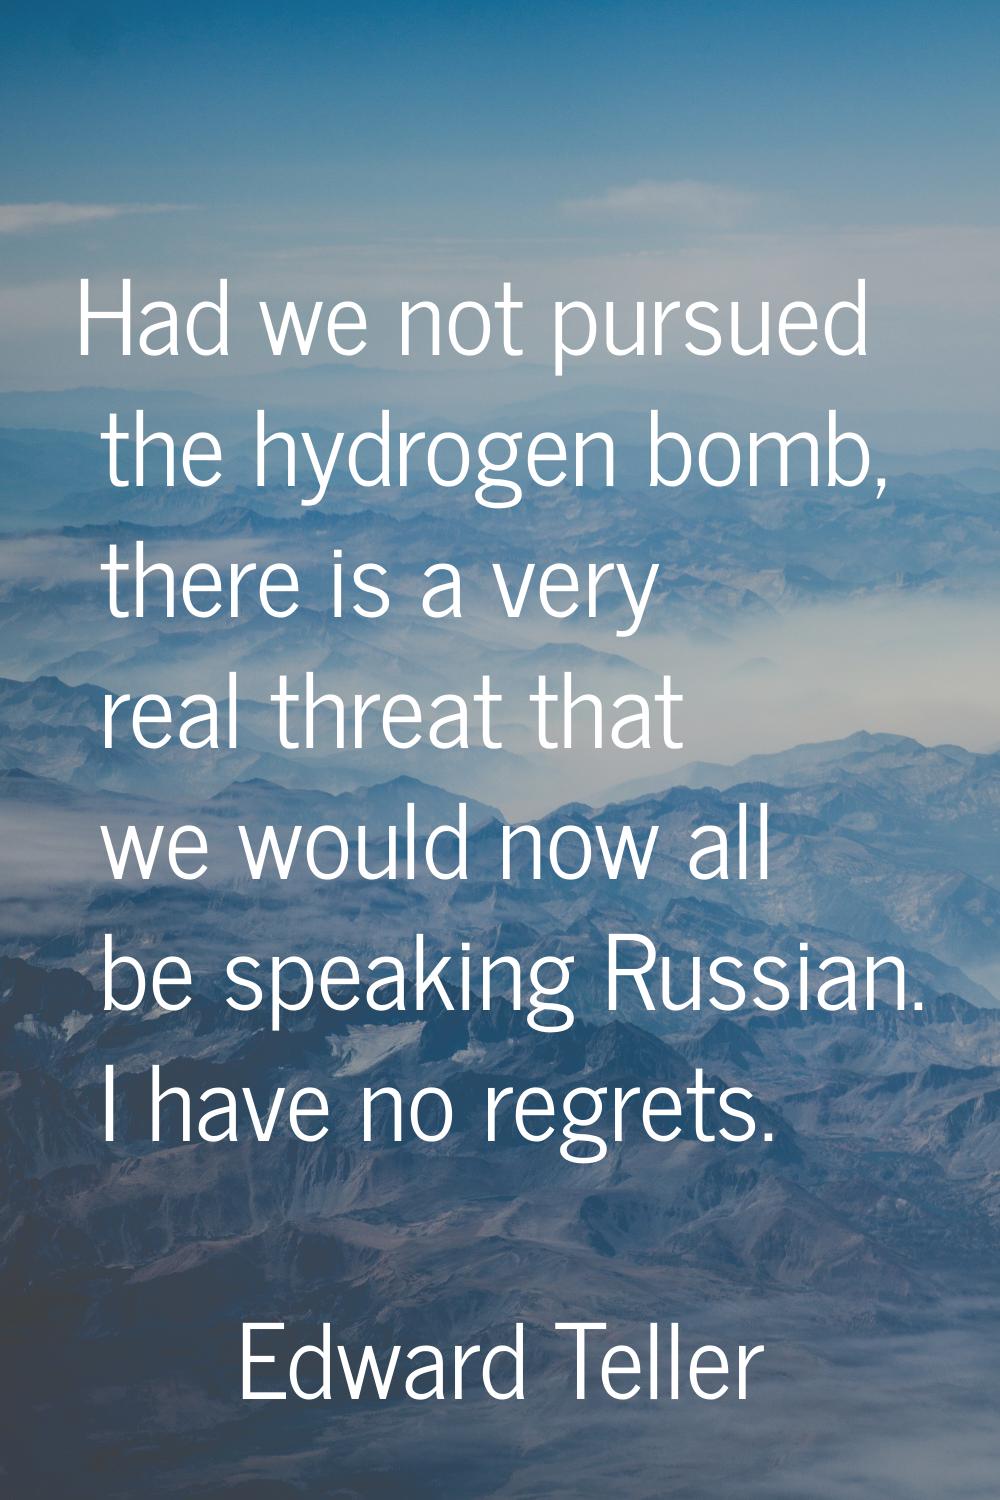 Had we not pursued the hydrogen bomb, there is a very real threat that we would now all be speaking